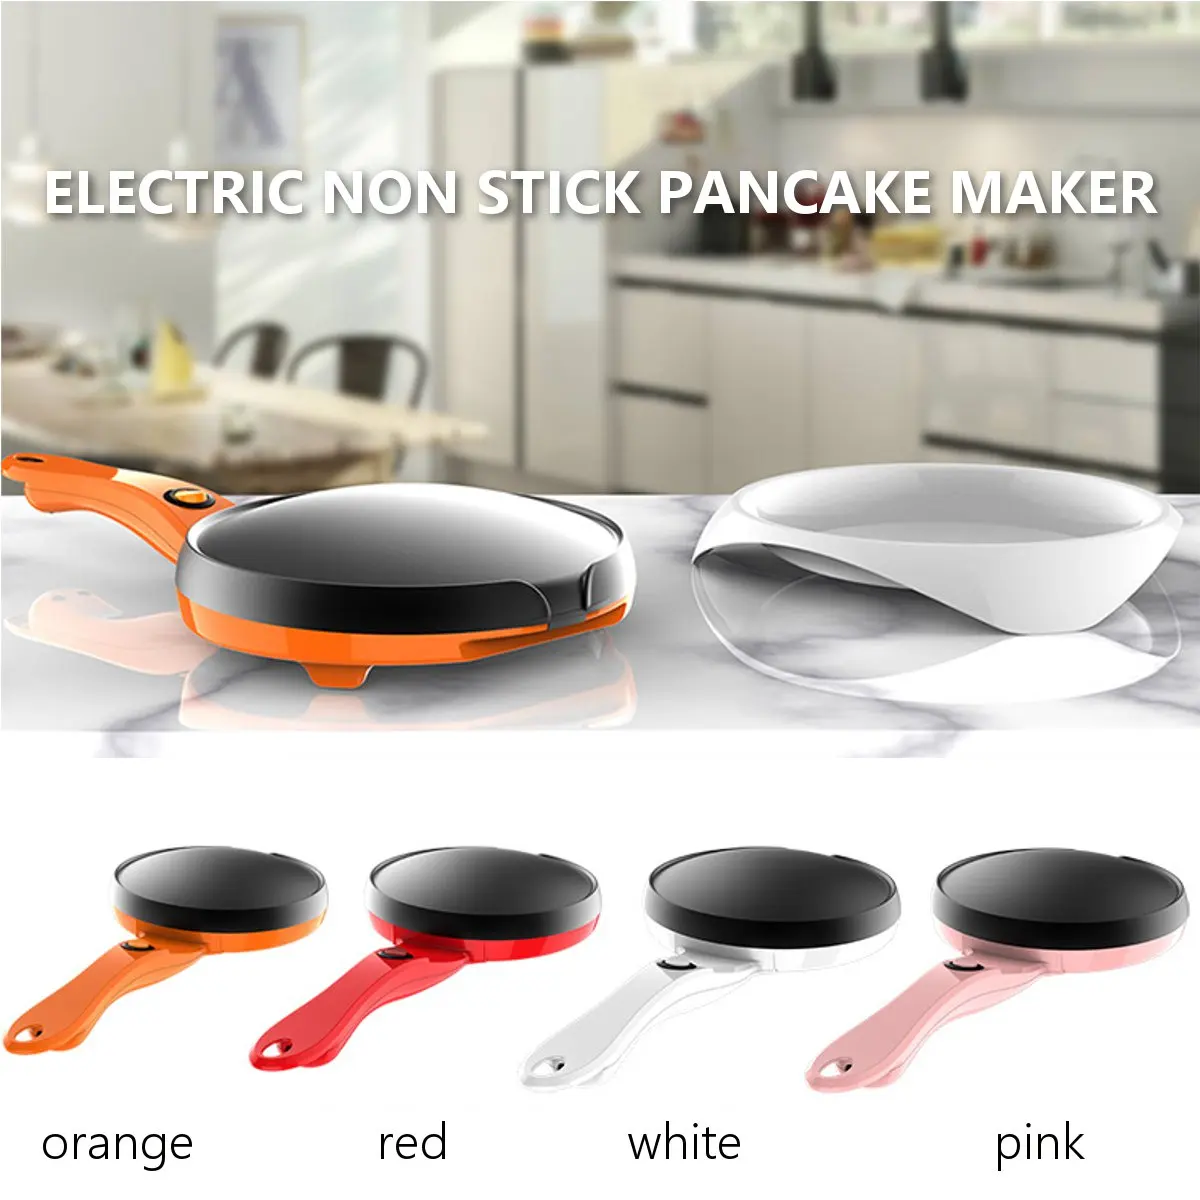 Non Stick Electric Crepe Maker Pancake Pizza Baking Pan Frying Griddle Machine Kitchen Cooking Tools Appliance 600W 220V 18cm